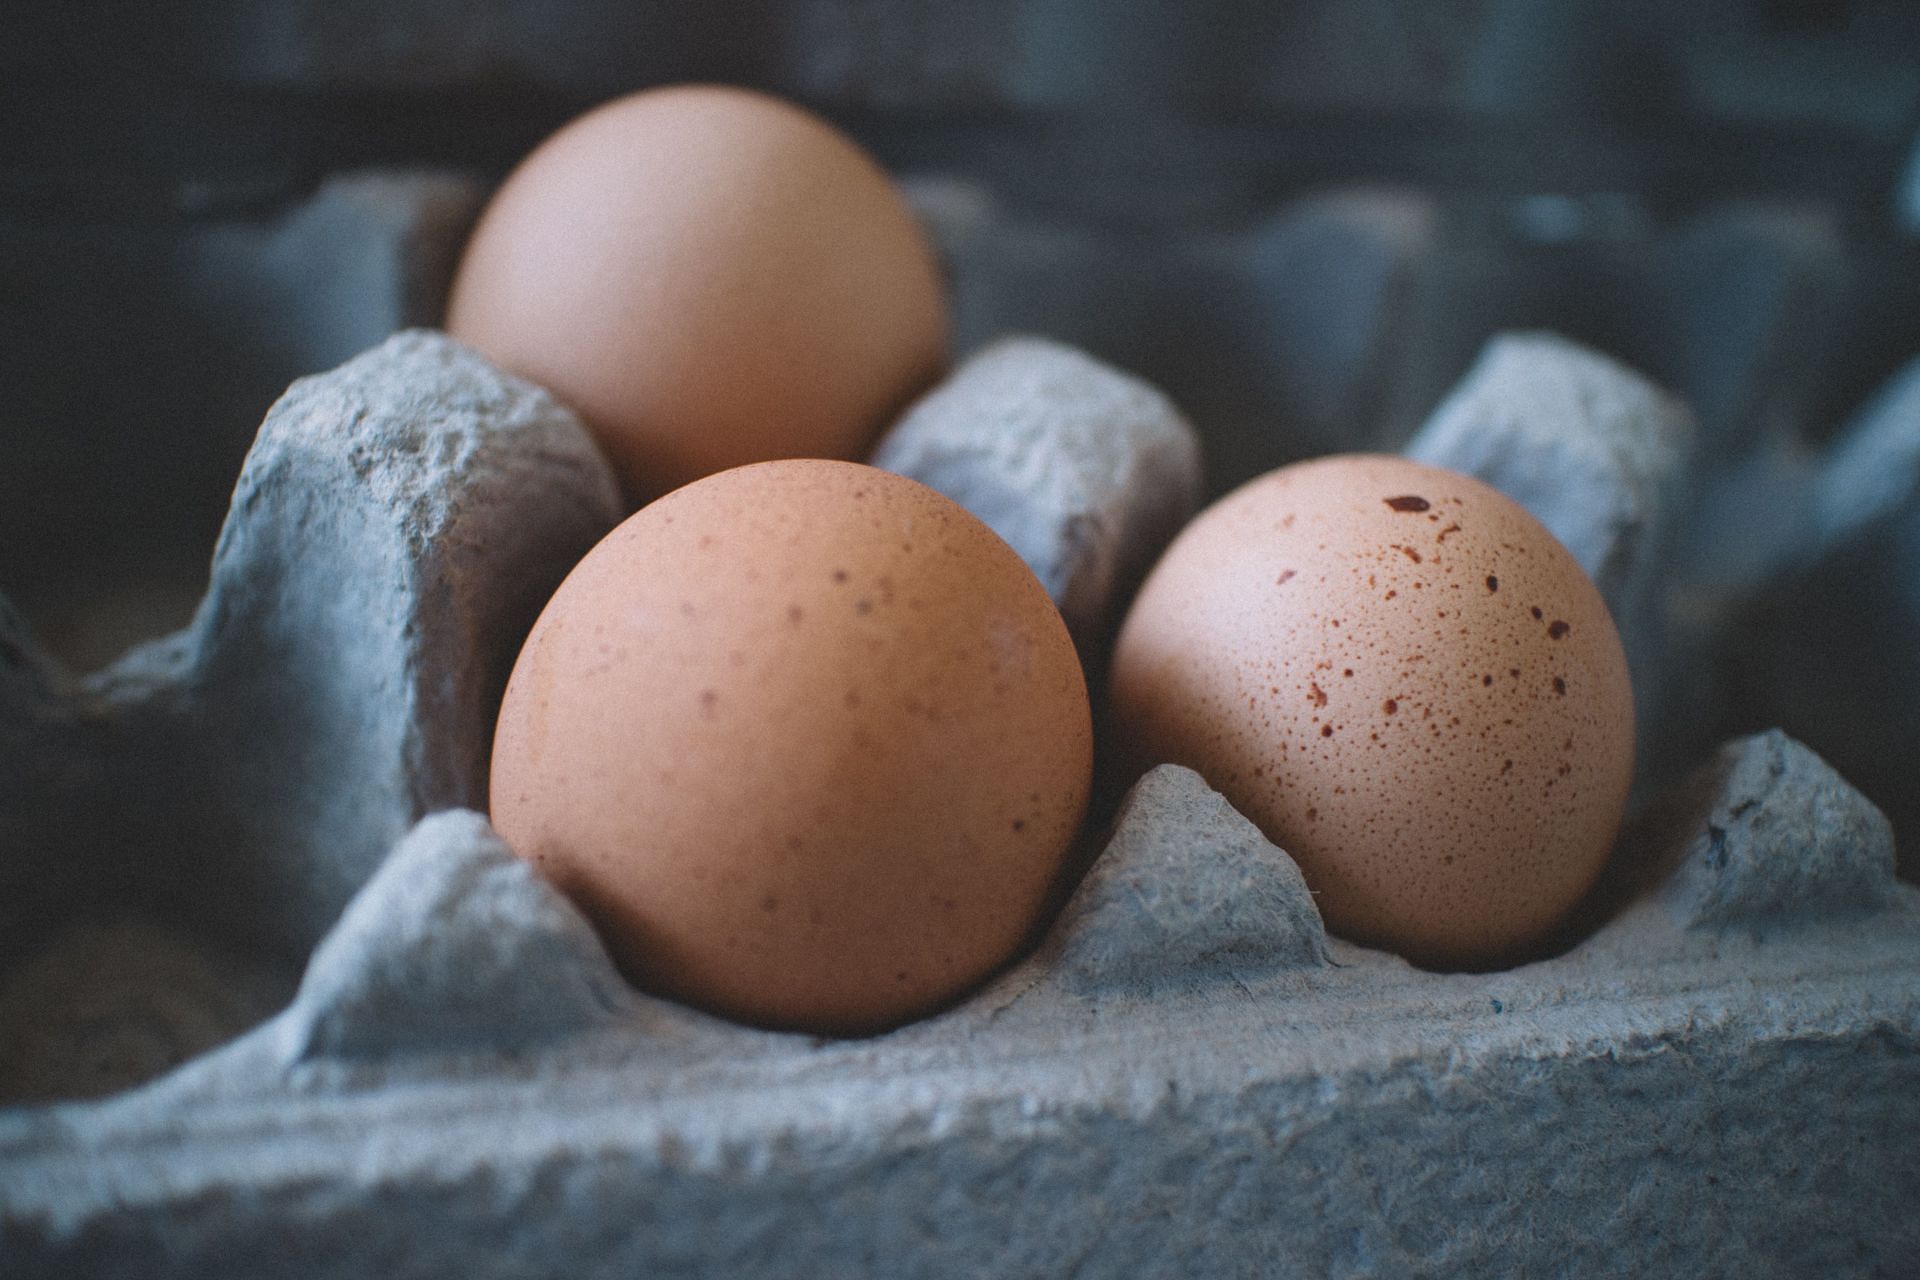 Ovomucoid protein is the common protein that causes egg allergy, (Image via Pexels/Monserrat Soldu)